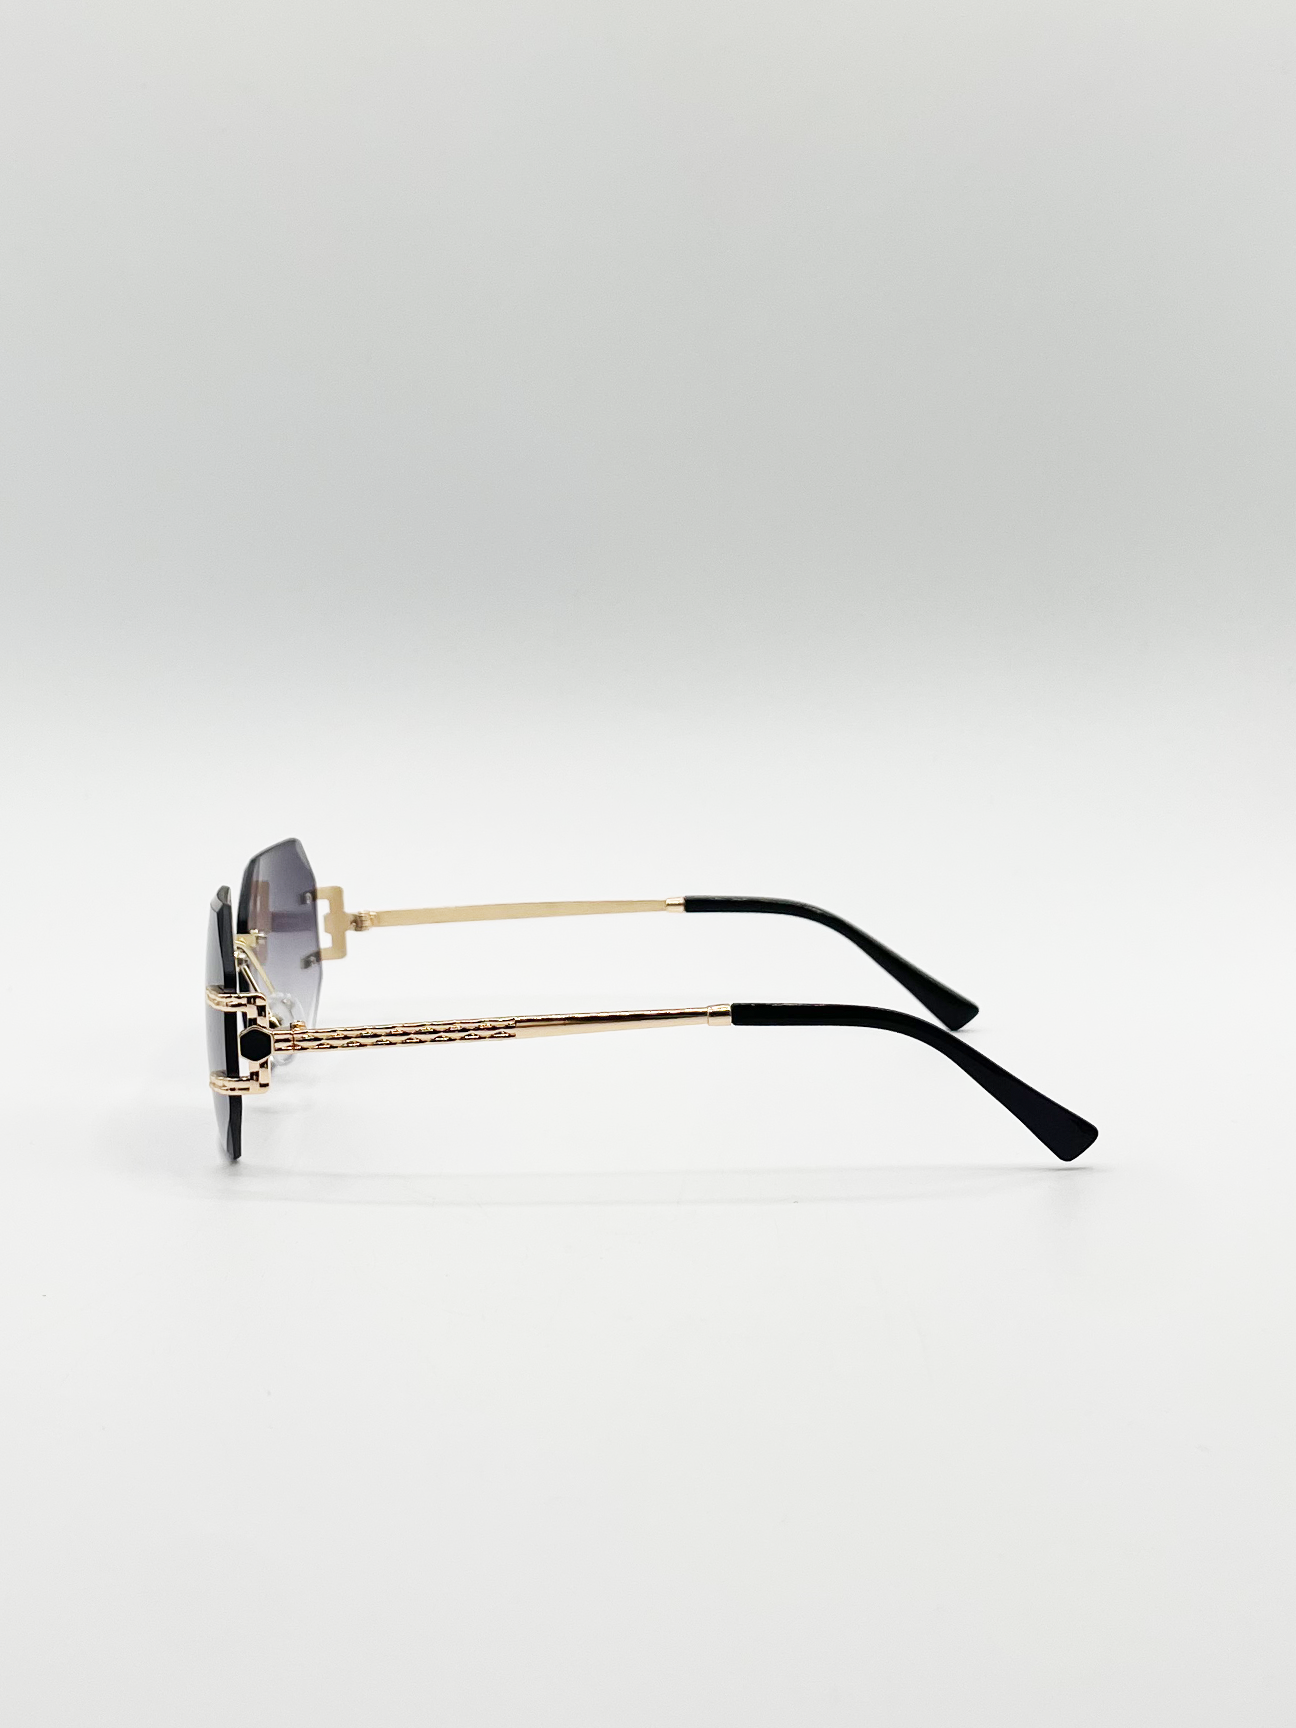 Frameless Octagon Lens with Metal arm in Black